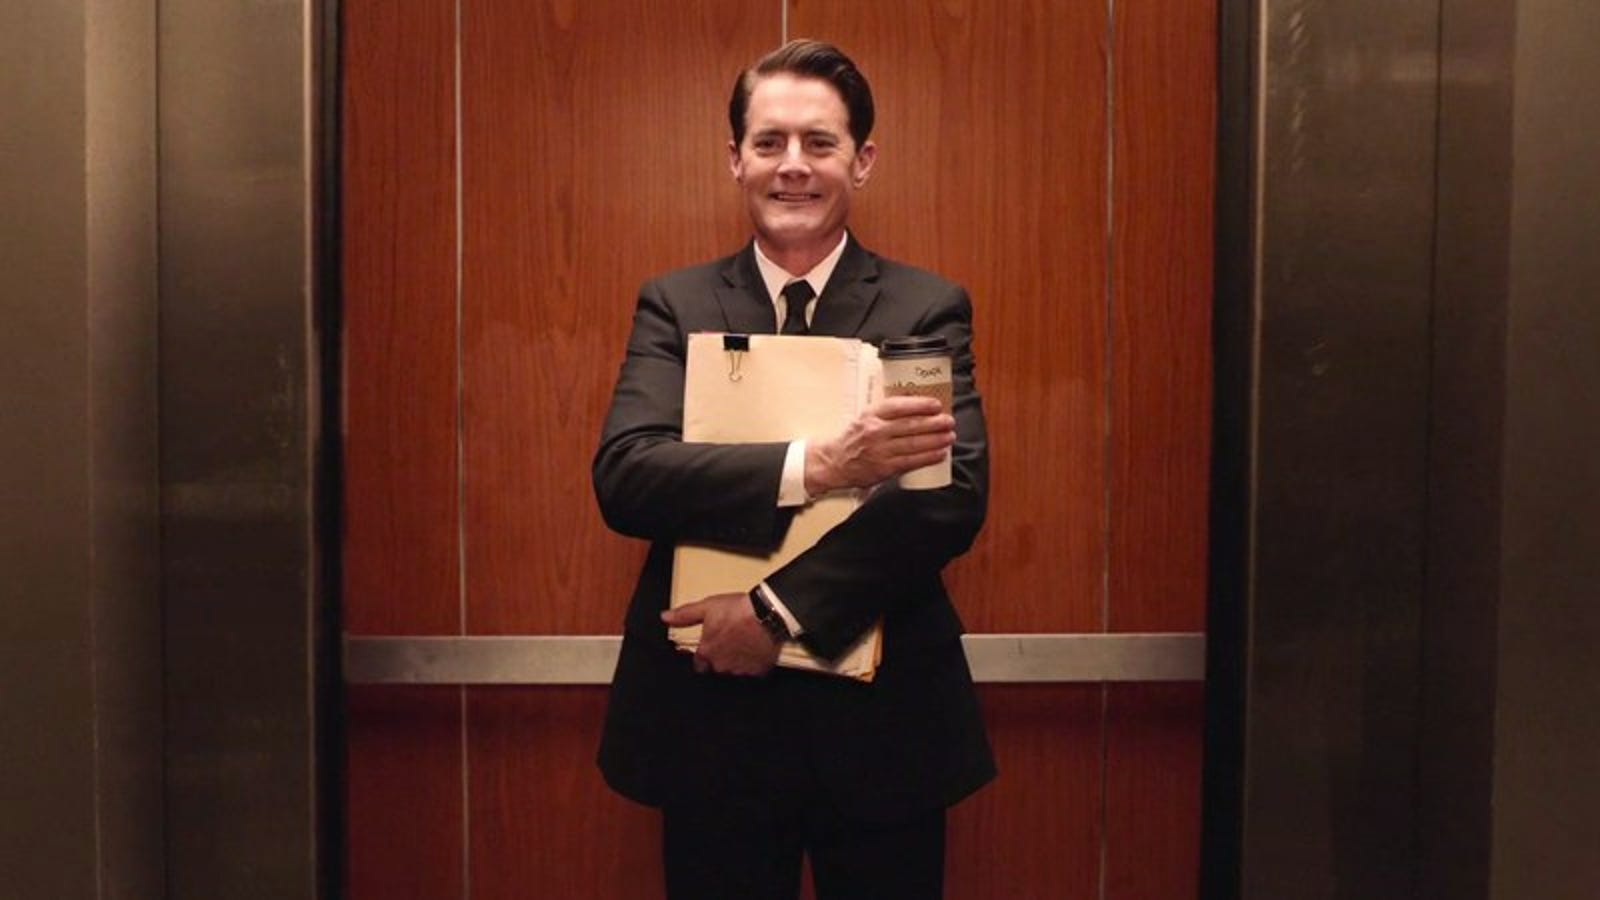 As Dale Cooper Wakes Up Twin Peaks Dares Us To Make Sense Of It—or Not